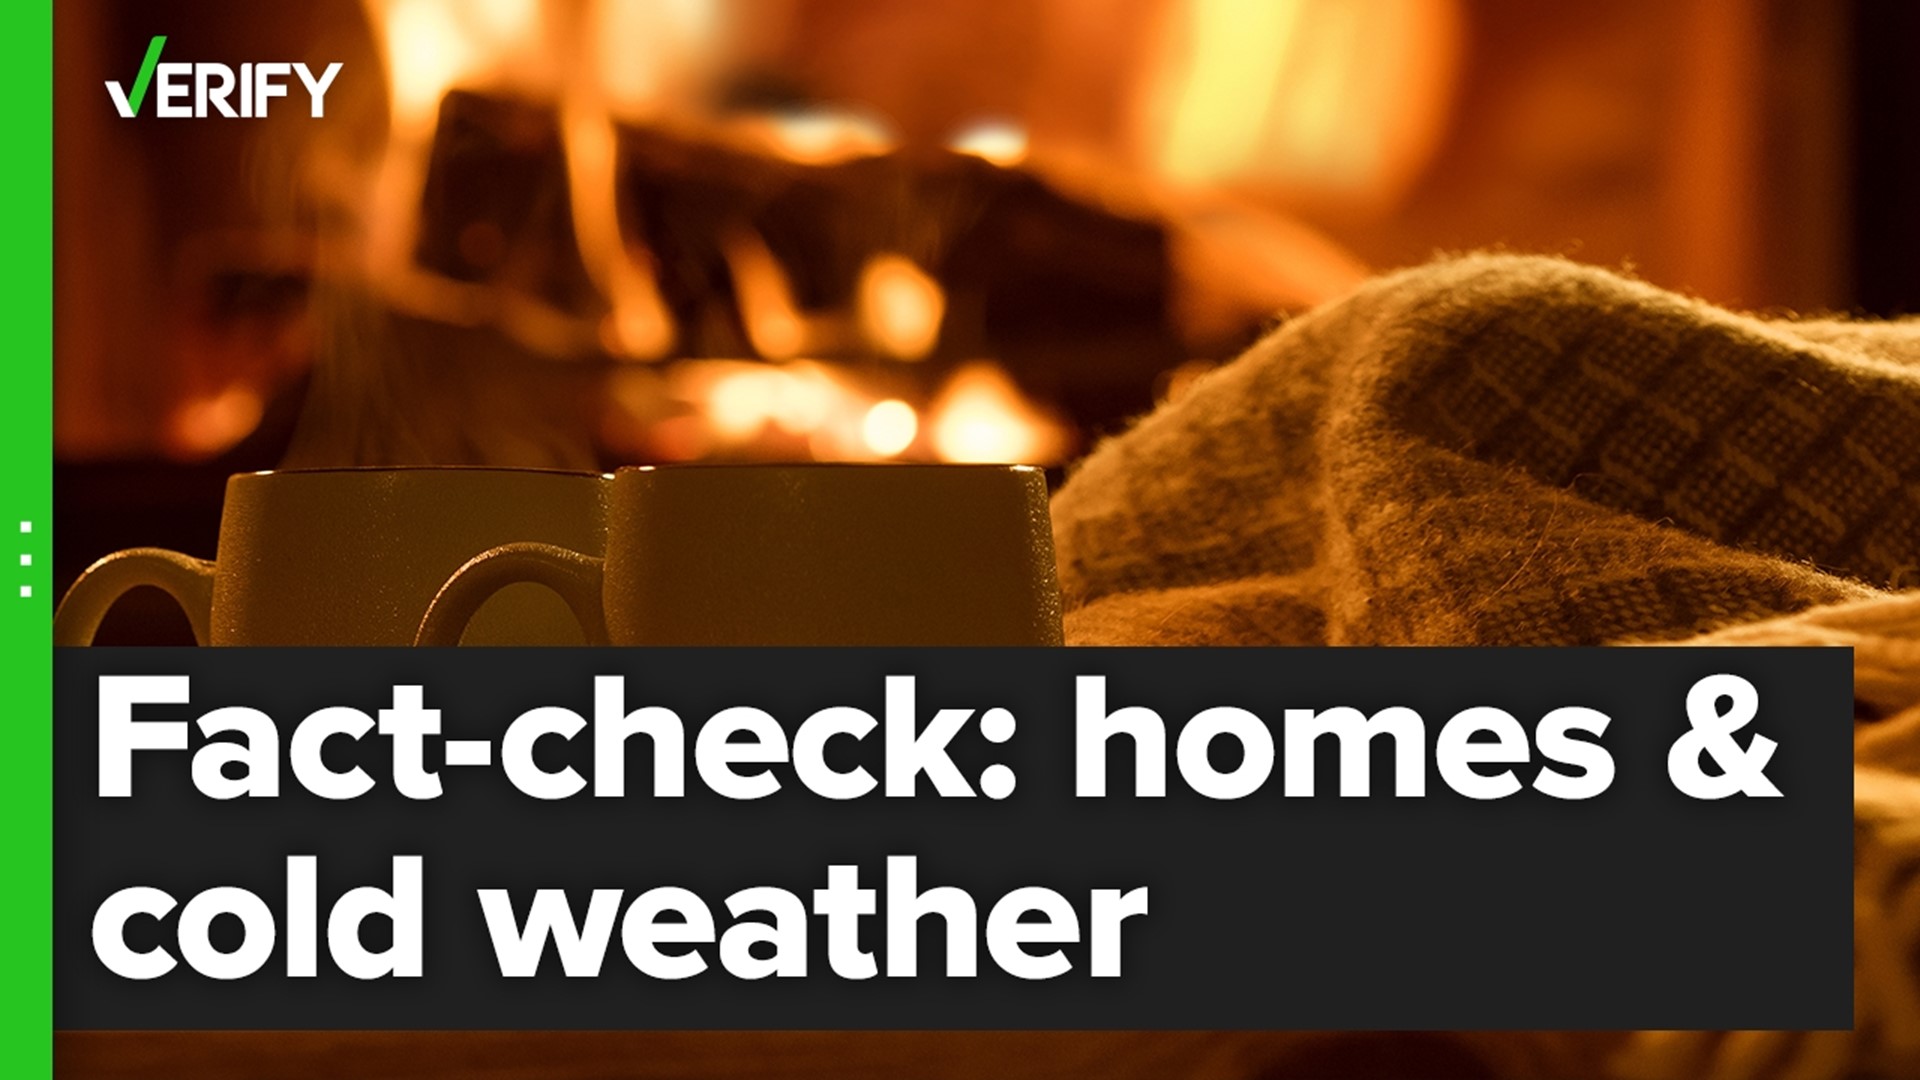 Should you use a ceiling fan in the winter? How about dripping your faucet? VERIFY gives you tips to prepare your home for extreme cold.